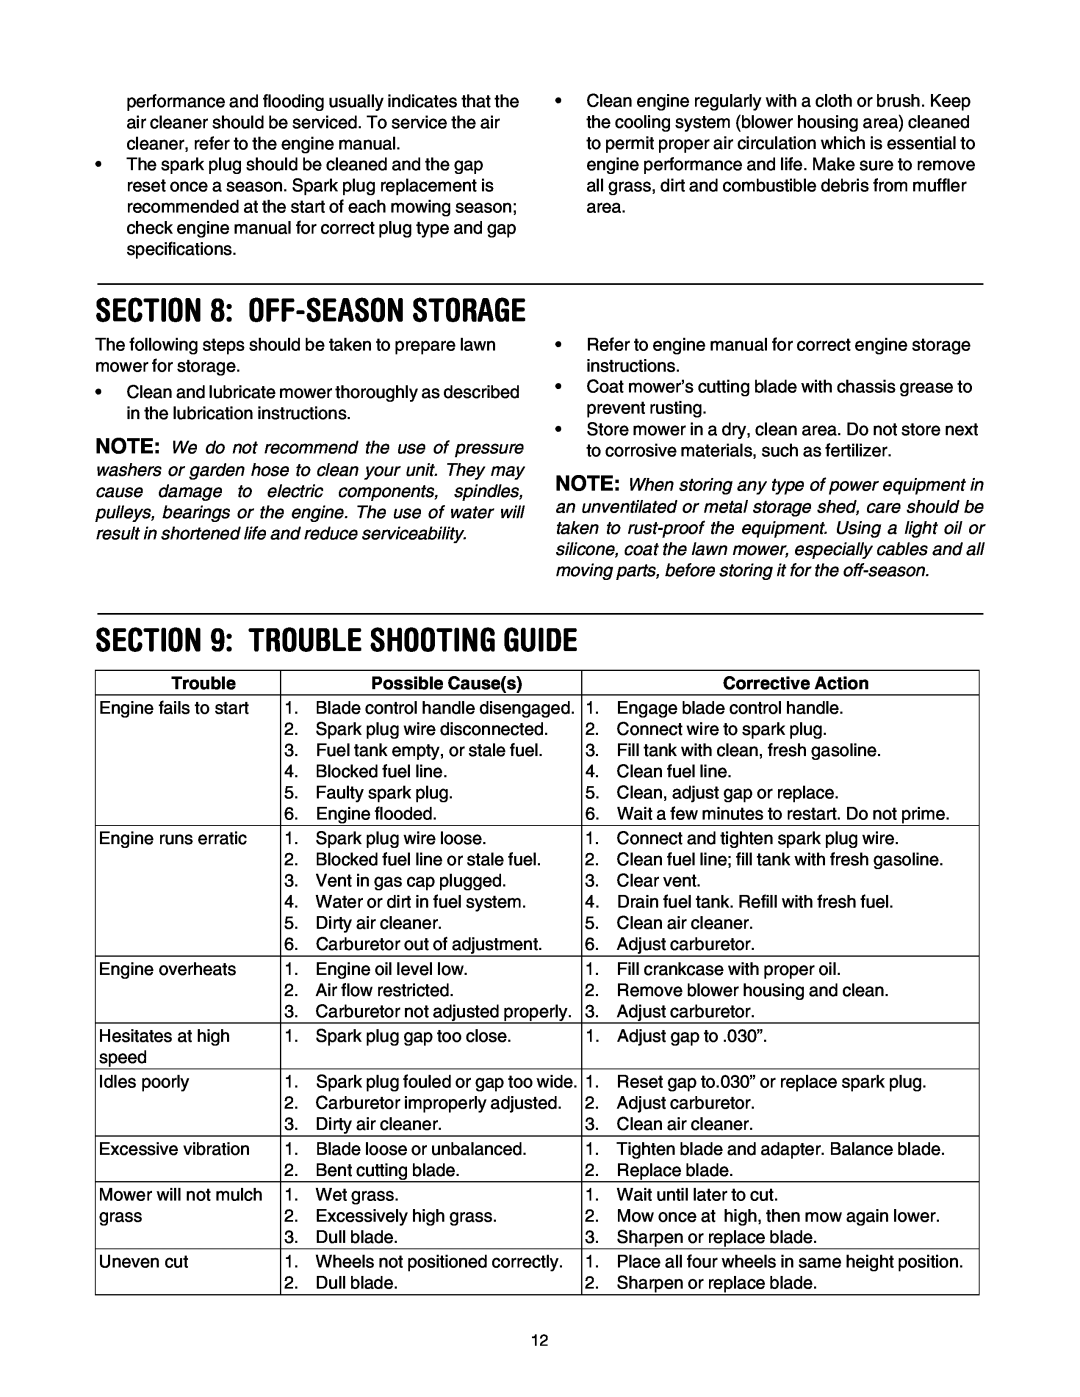 Troy-Bilt 106 manual Trouble Shooting Guide, Off-Season Storage, Possible Causes, Corrective Action 